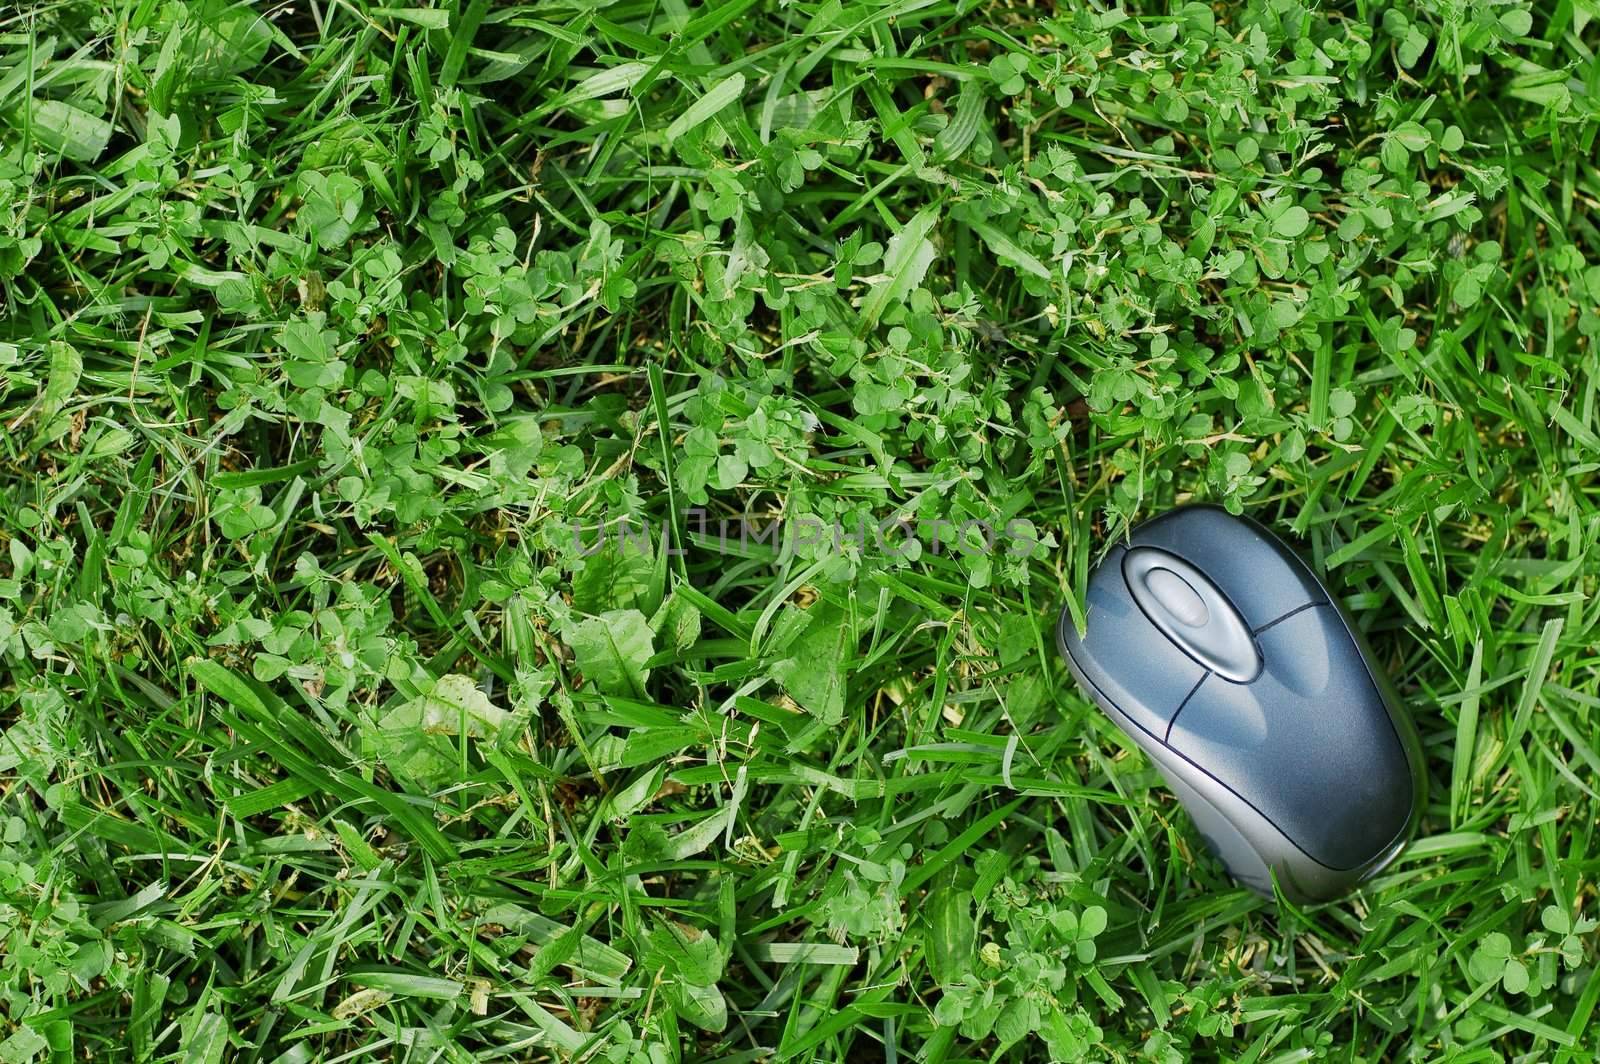 Wireless mouse on green grass.